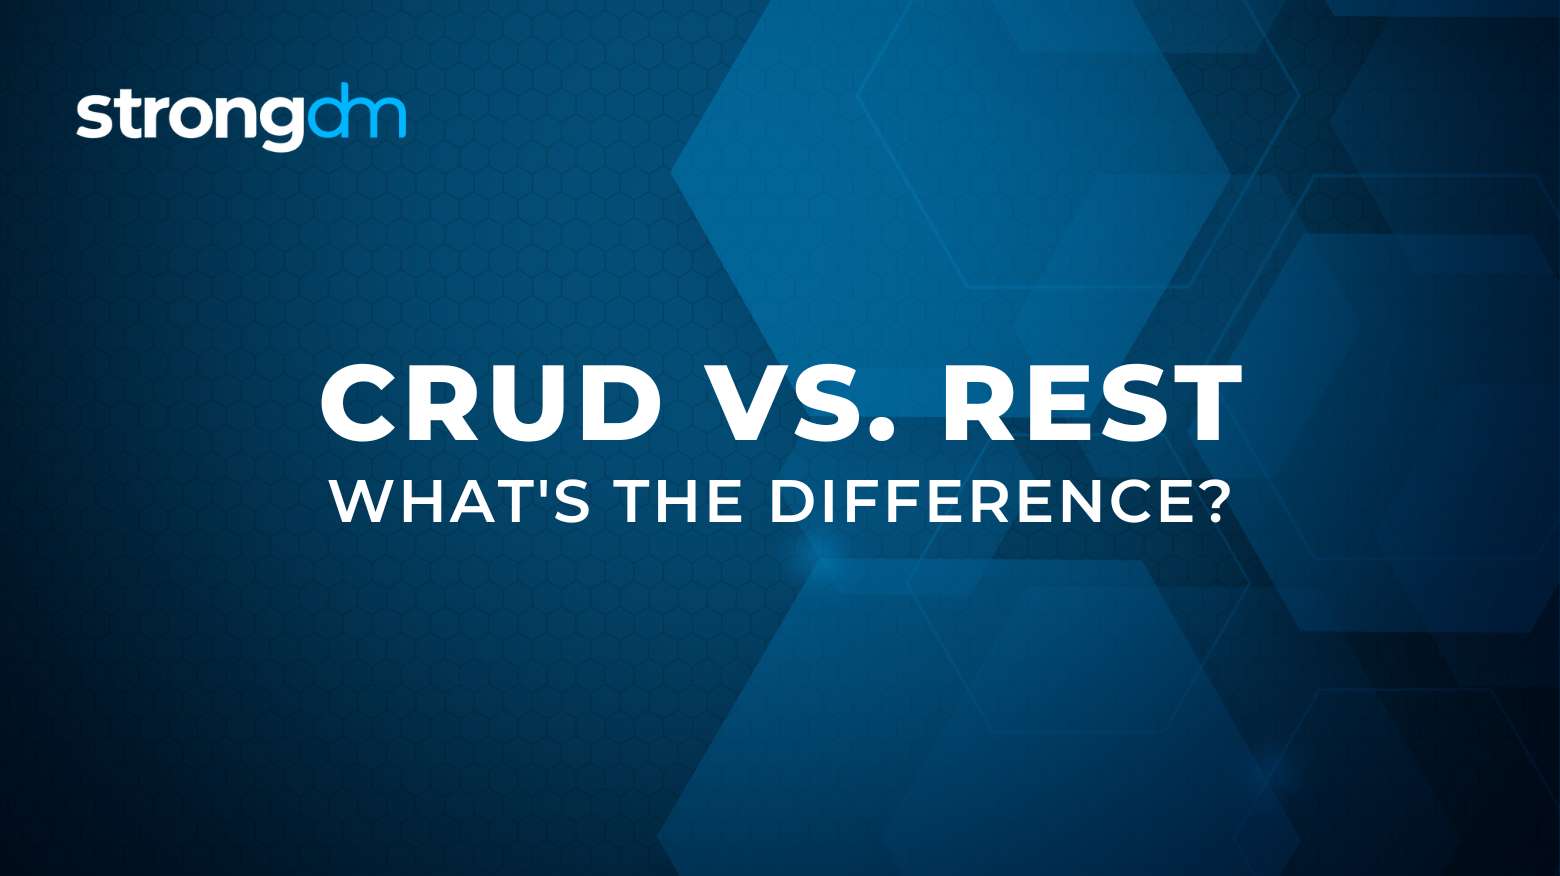 Understanding the Difference Between CRUD and REST